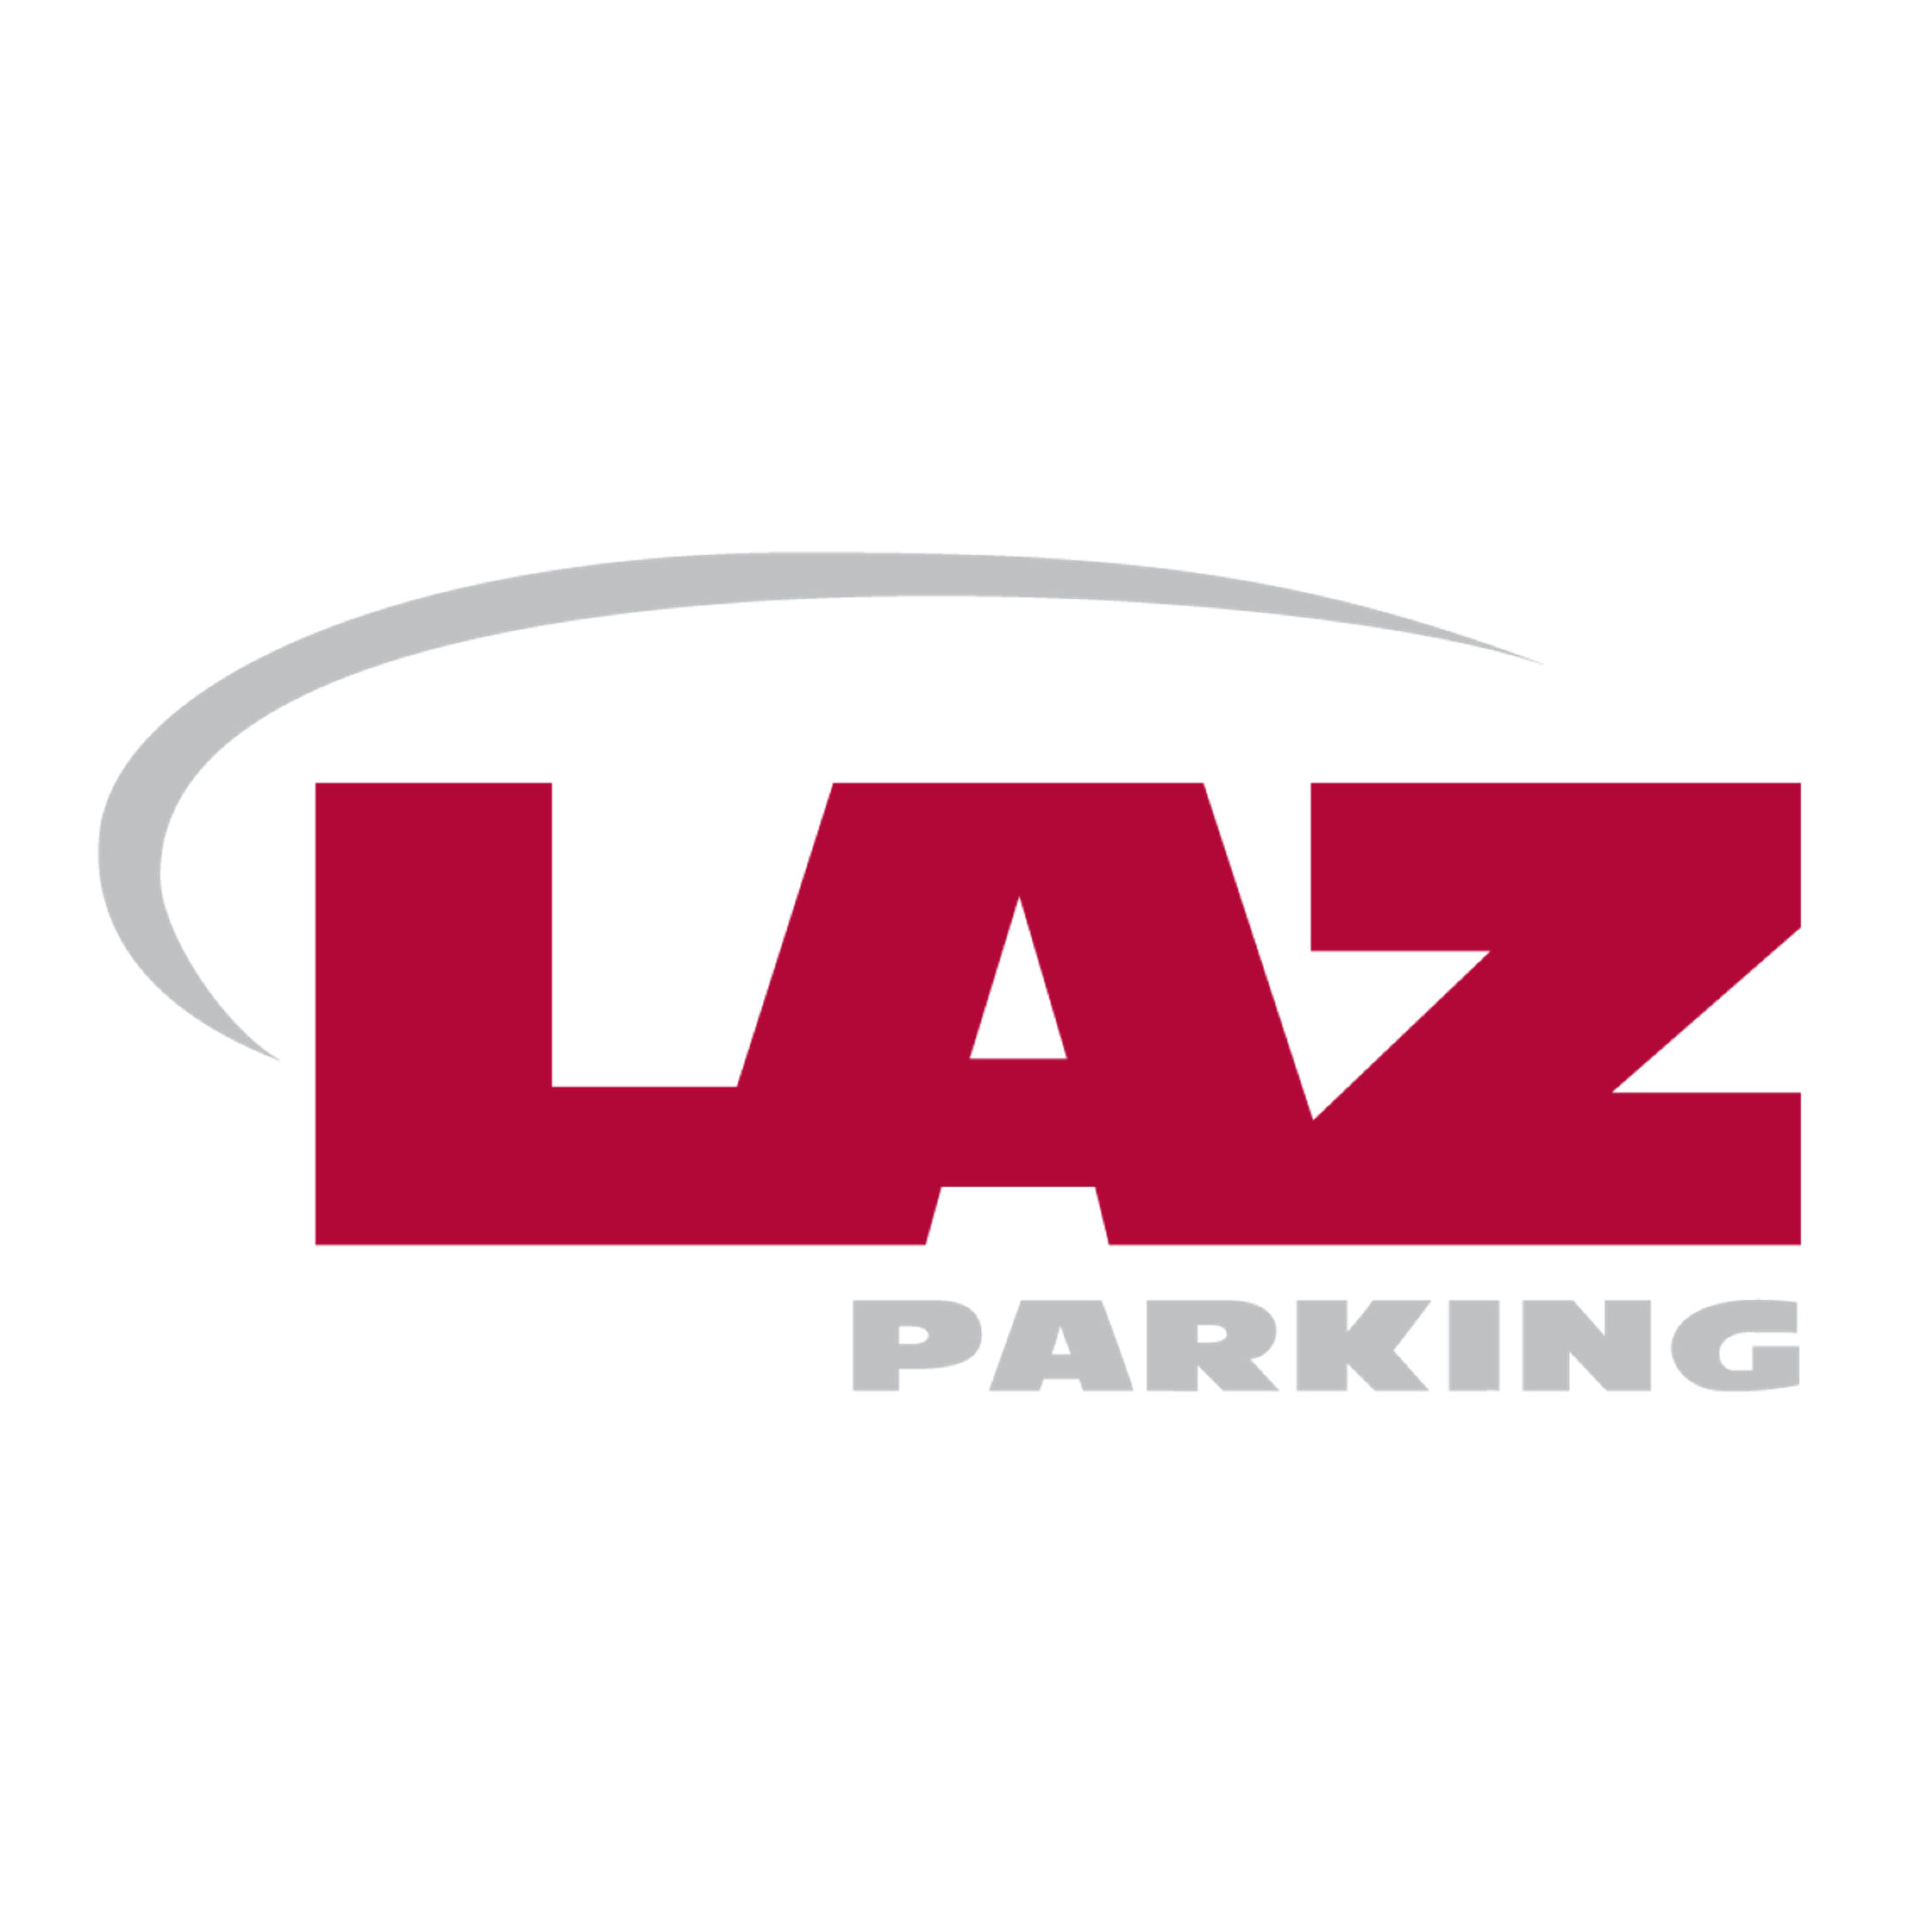 LAZ Parking - Indianapolis, IN 46225 - (317)638-5805 | ShowMeLocal.com